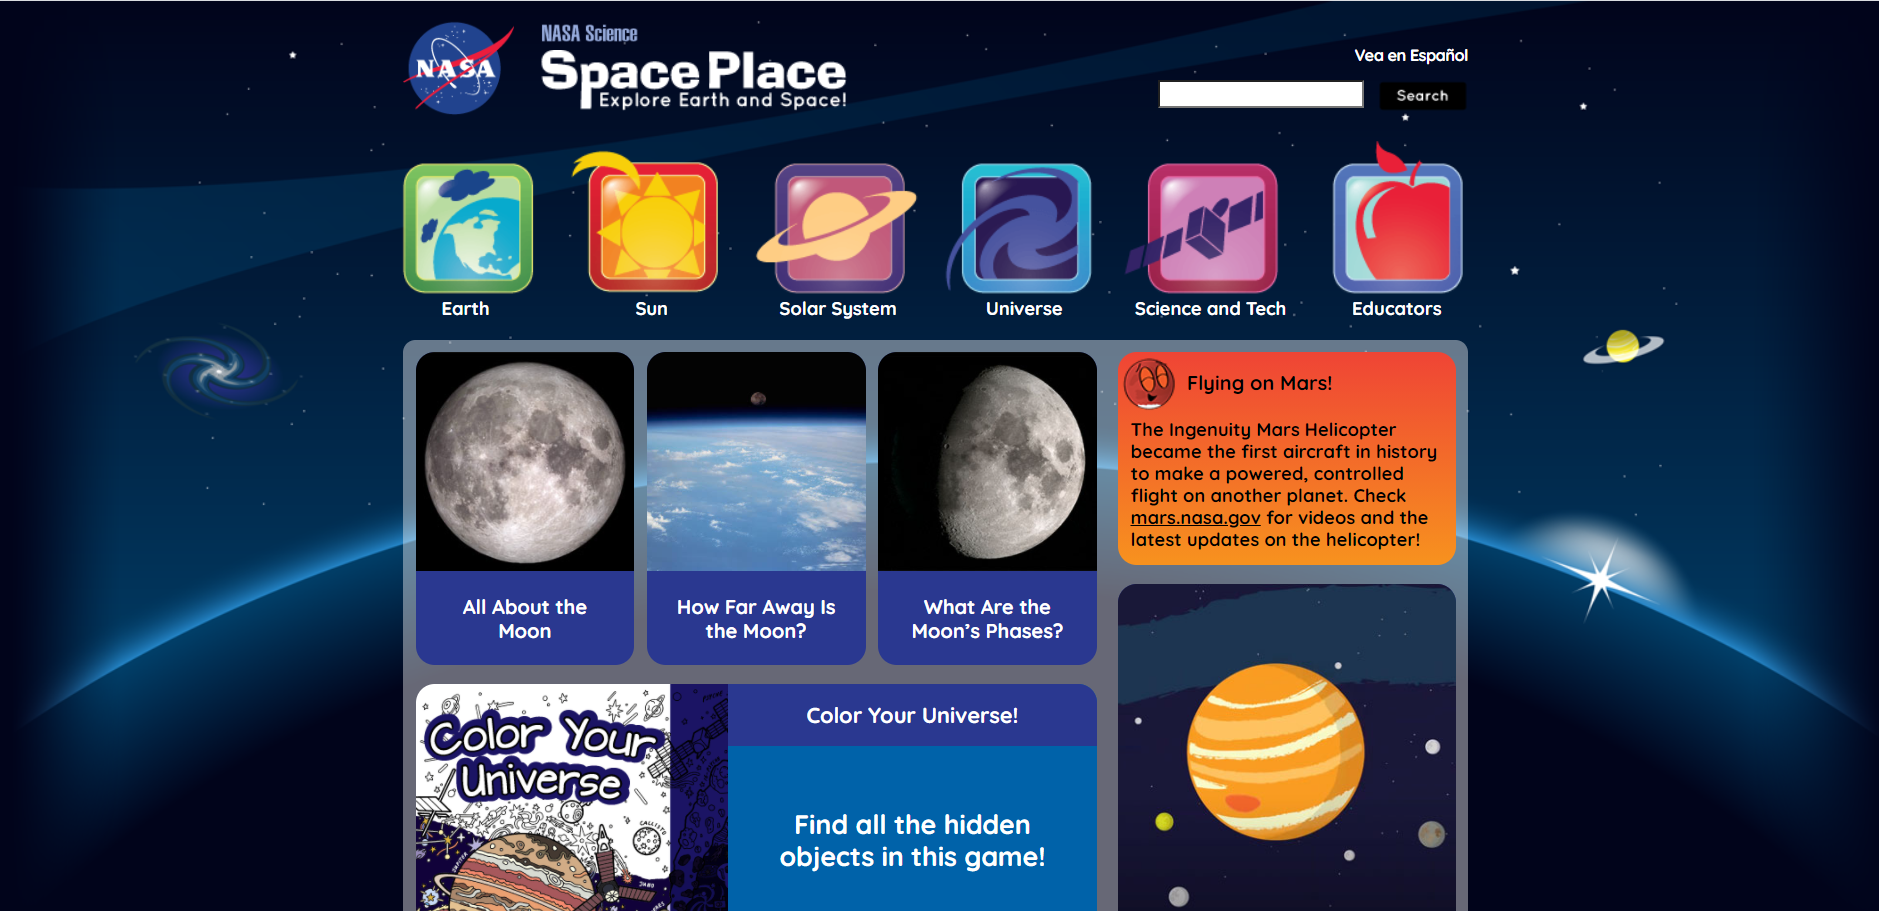 The Space Place NASA